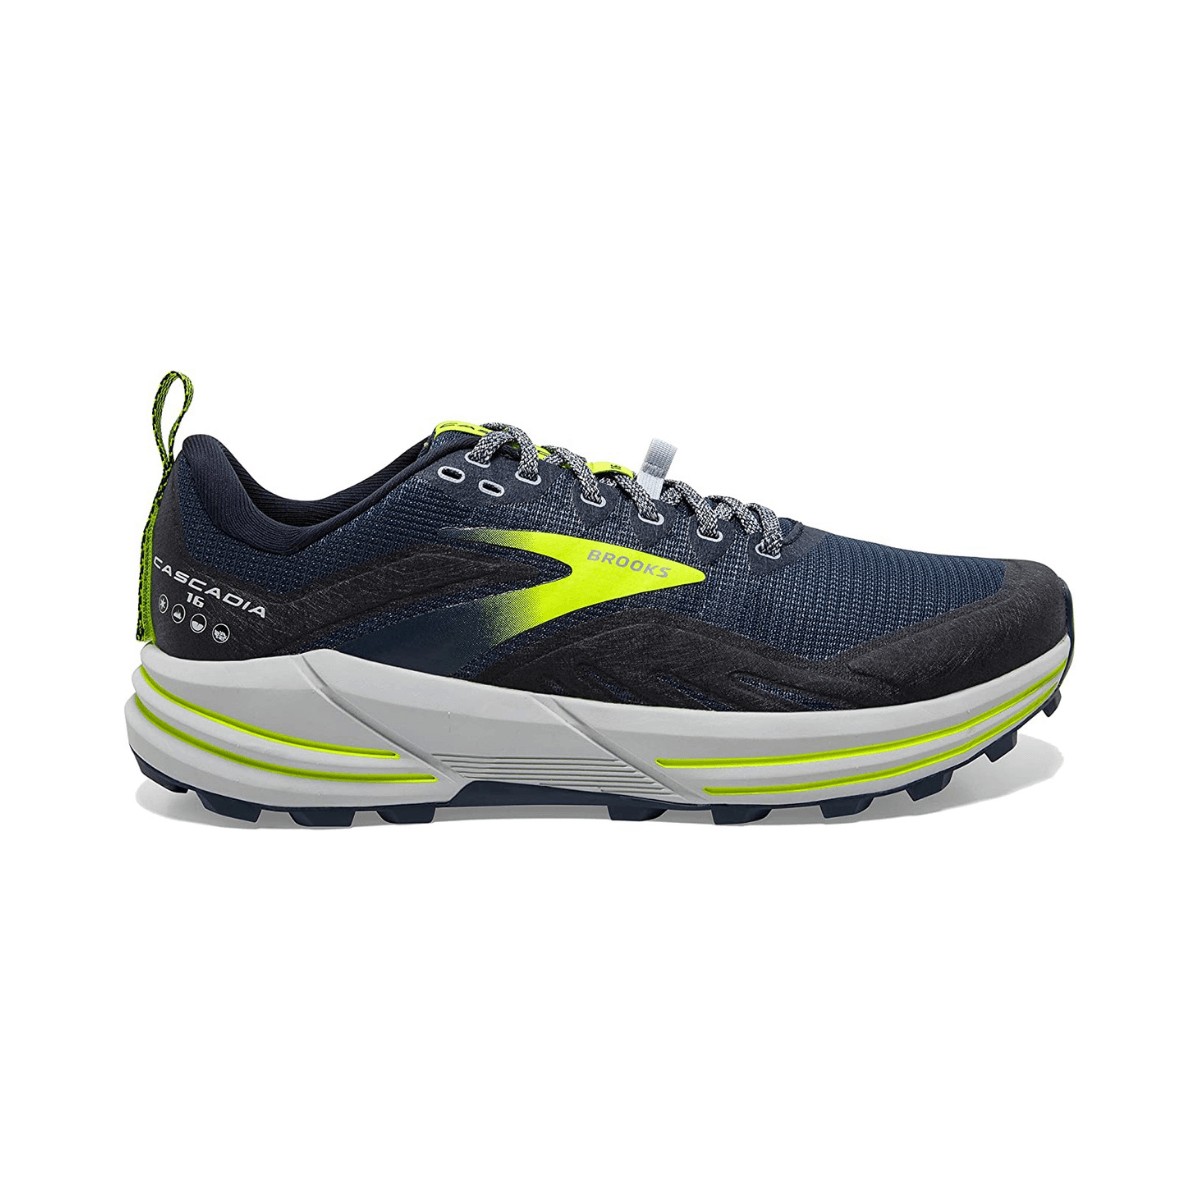 Chaussures Trail Brooks Cascadia 16 Bleu Lime SS22, Taille 40,5 - EUR